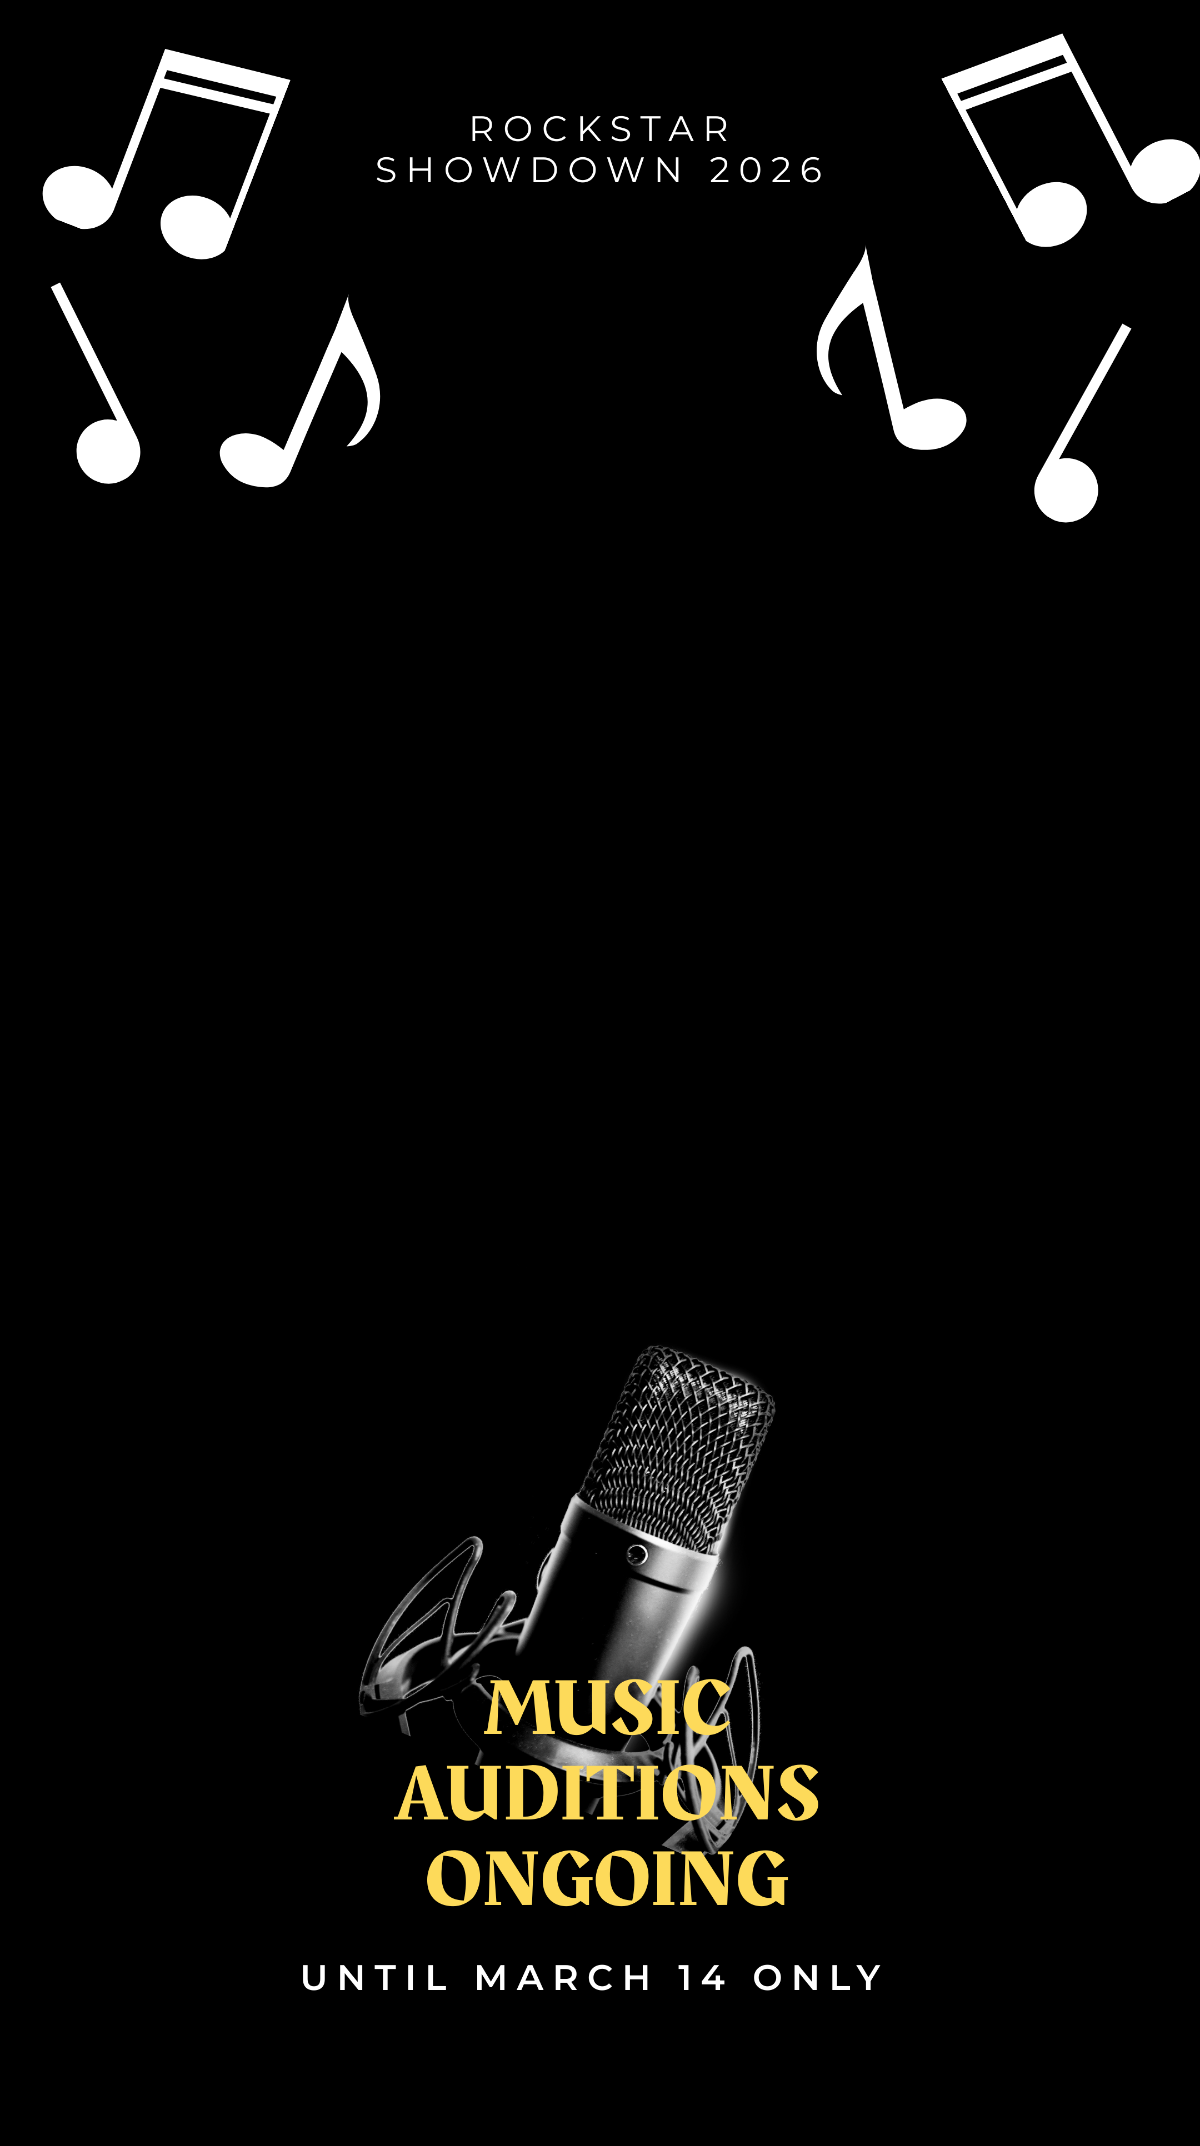 Music Audition Snapchat Geofilter